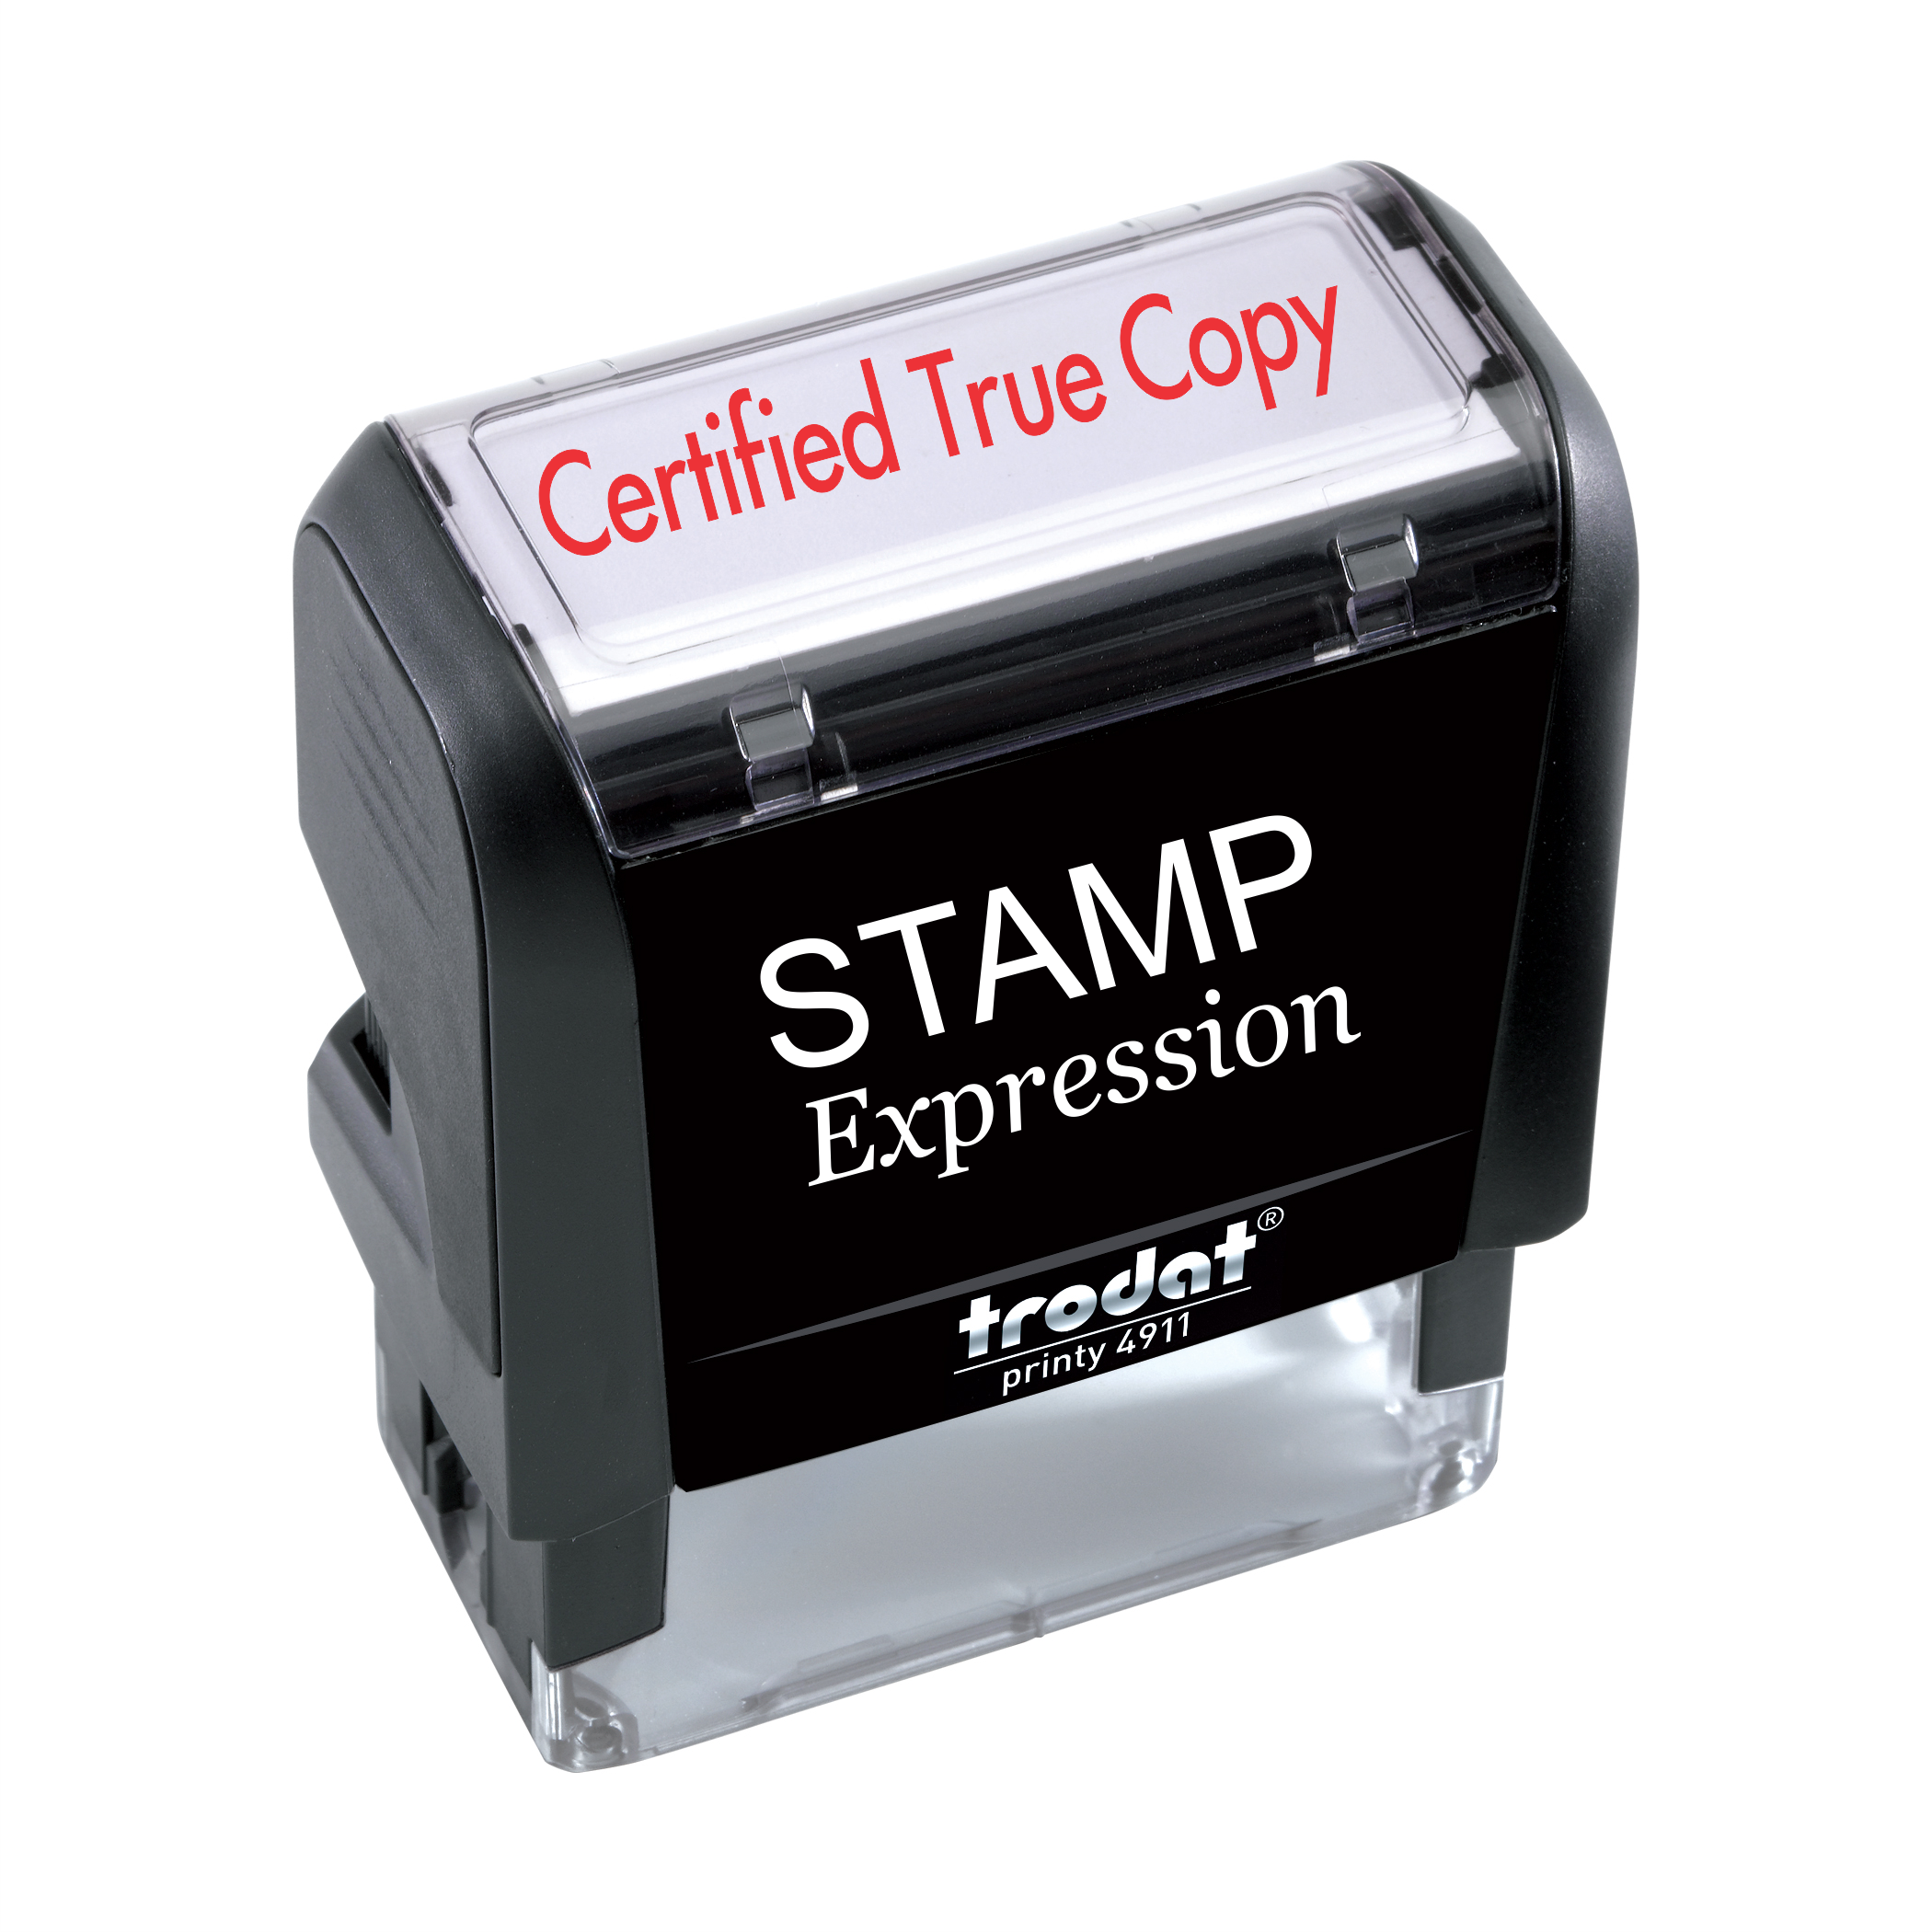 Certified True Copy One Line Office Self Inking Rubber Stamp